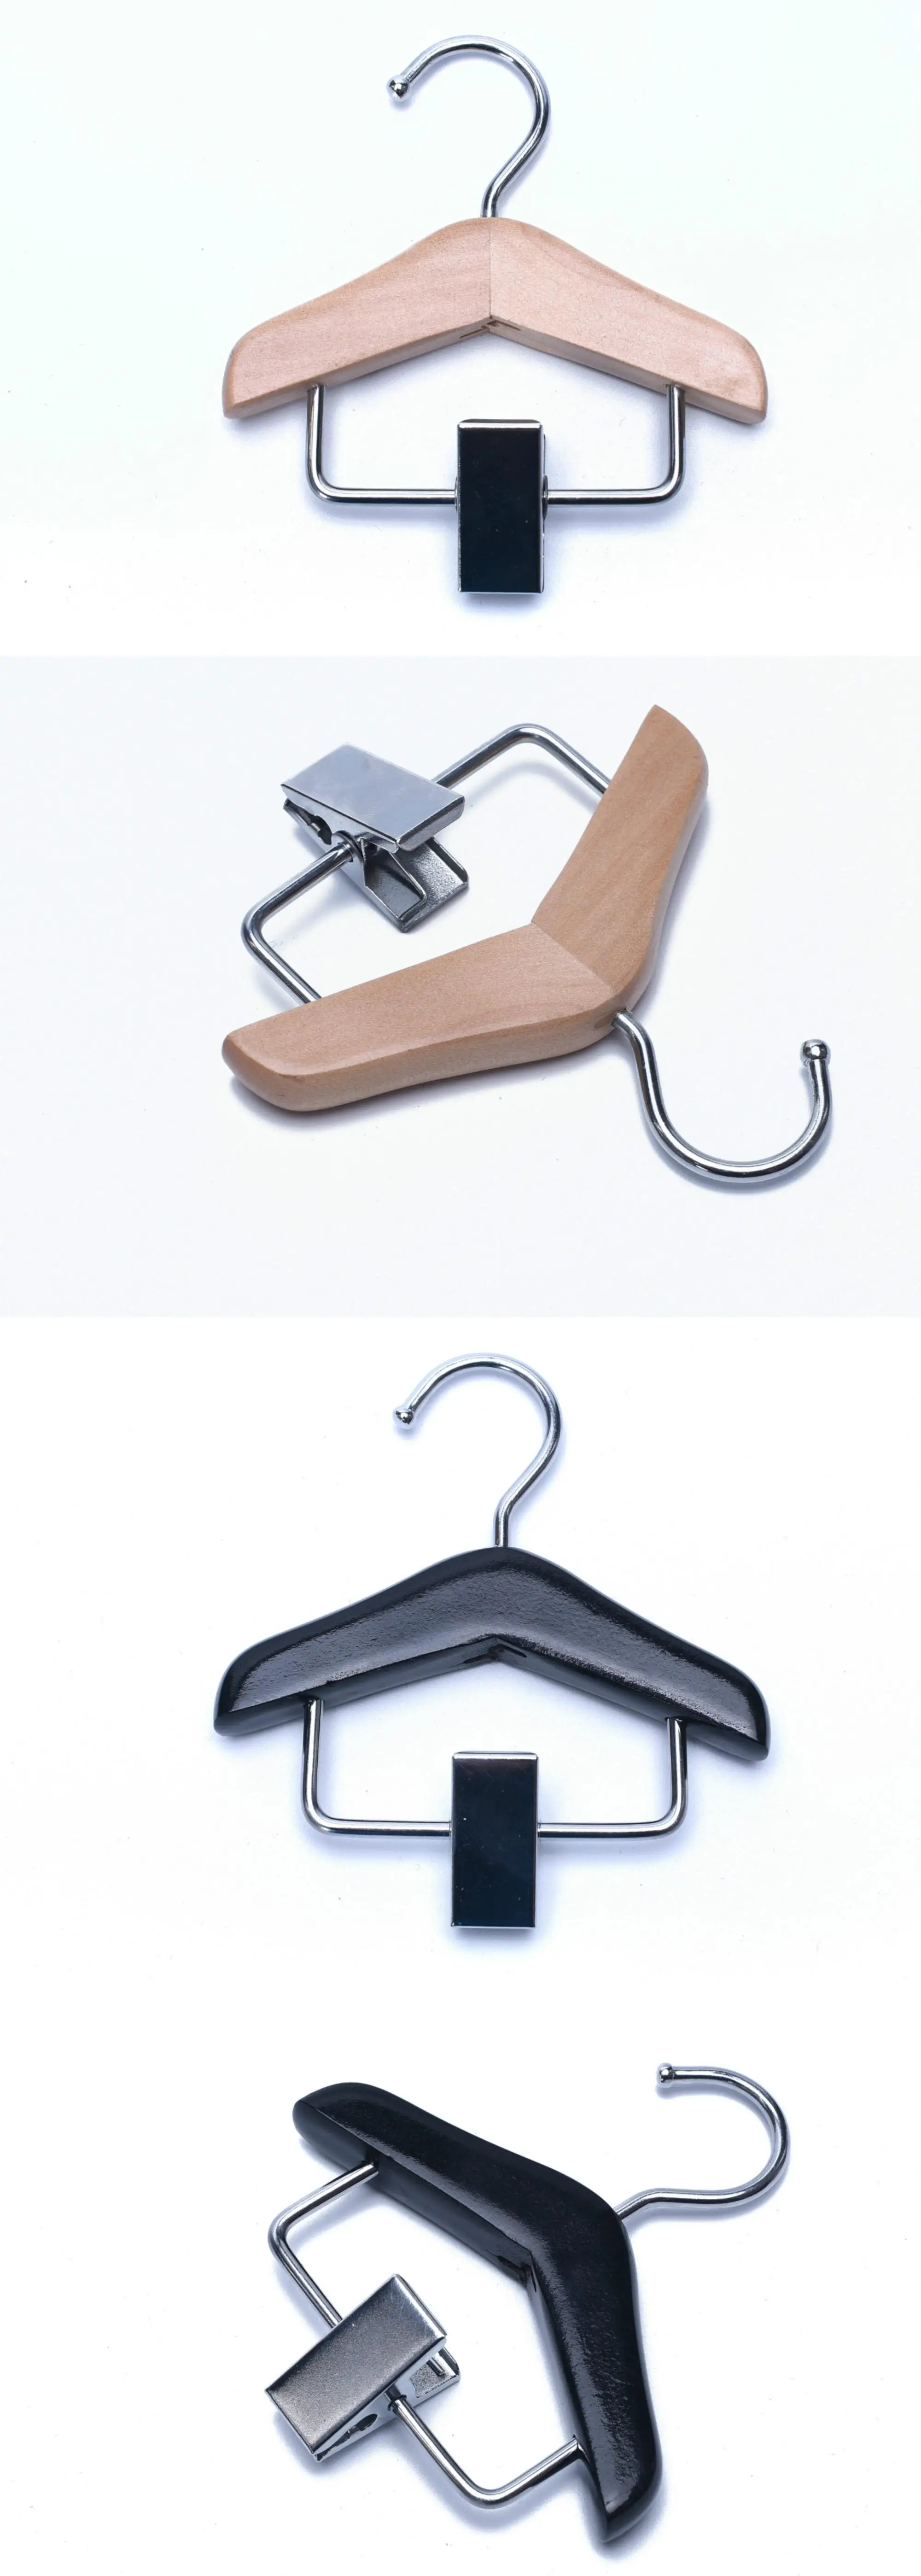 HOMI Children's clothes hangers with clips (by 5) - Charlie Crane